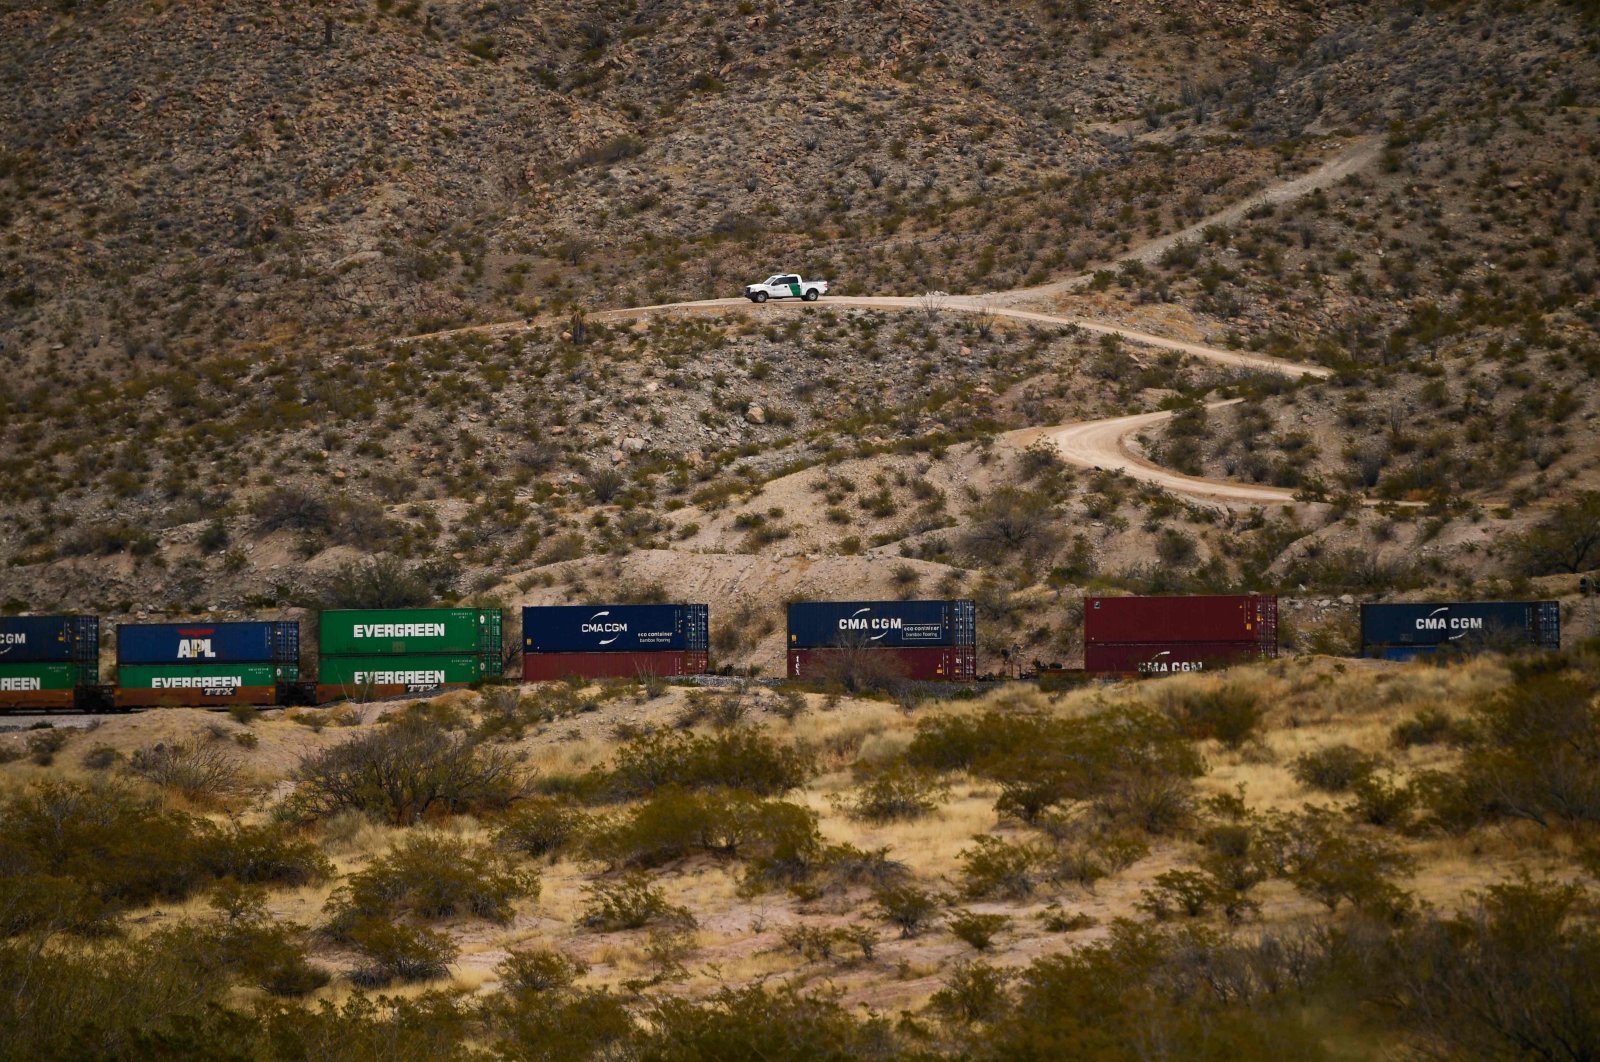 A U.S. Border Patrol vehicle sits on a hillside as a freight train carries cargo containers in the El Paso Sector along the US-Mexico border between New Mexico and Chihuahua state in Sunland Park, New Mexico, on Dec. 9, 2021 (AFP Photo)